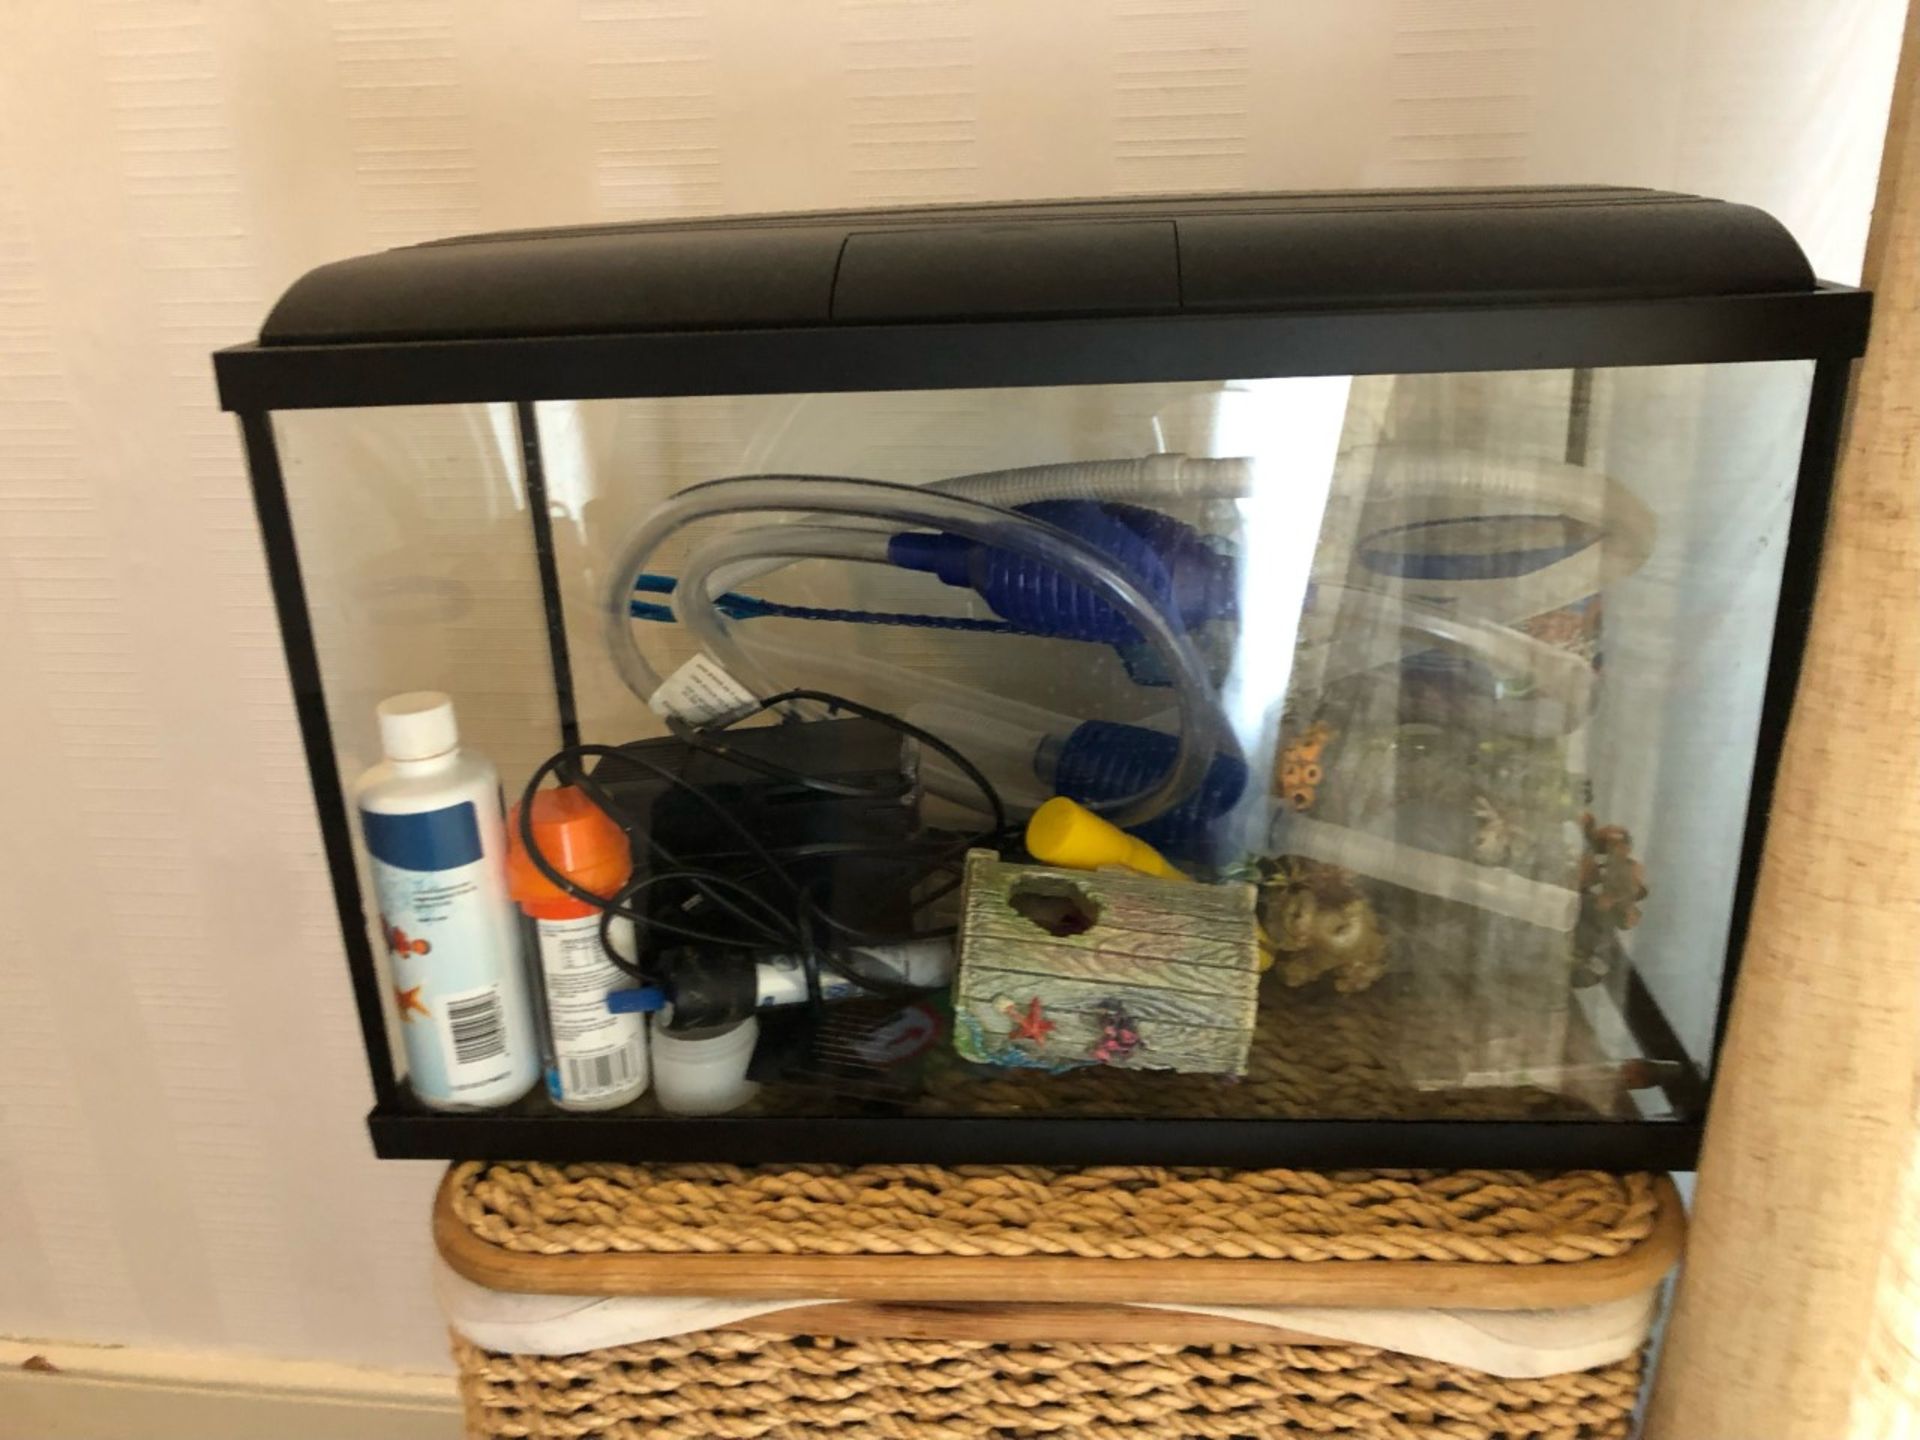 50L fish tank with everything included. Cleaner, pump, ornaments, stones everything there ready